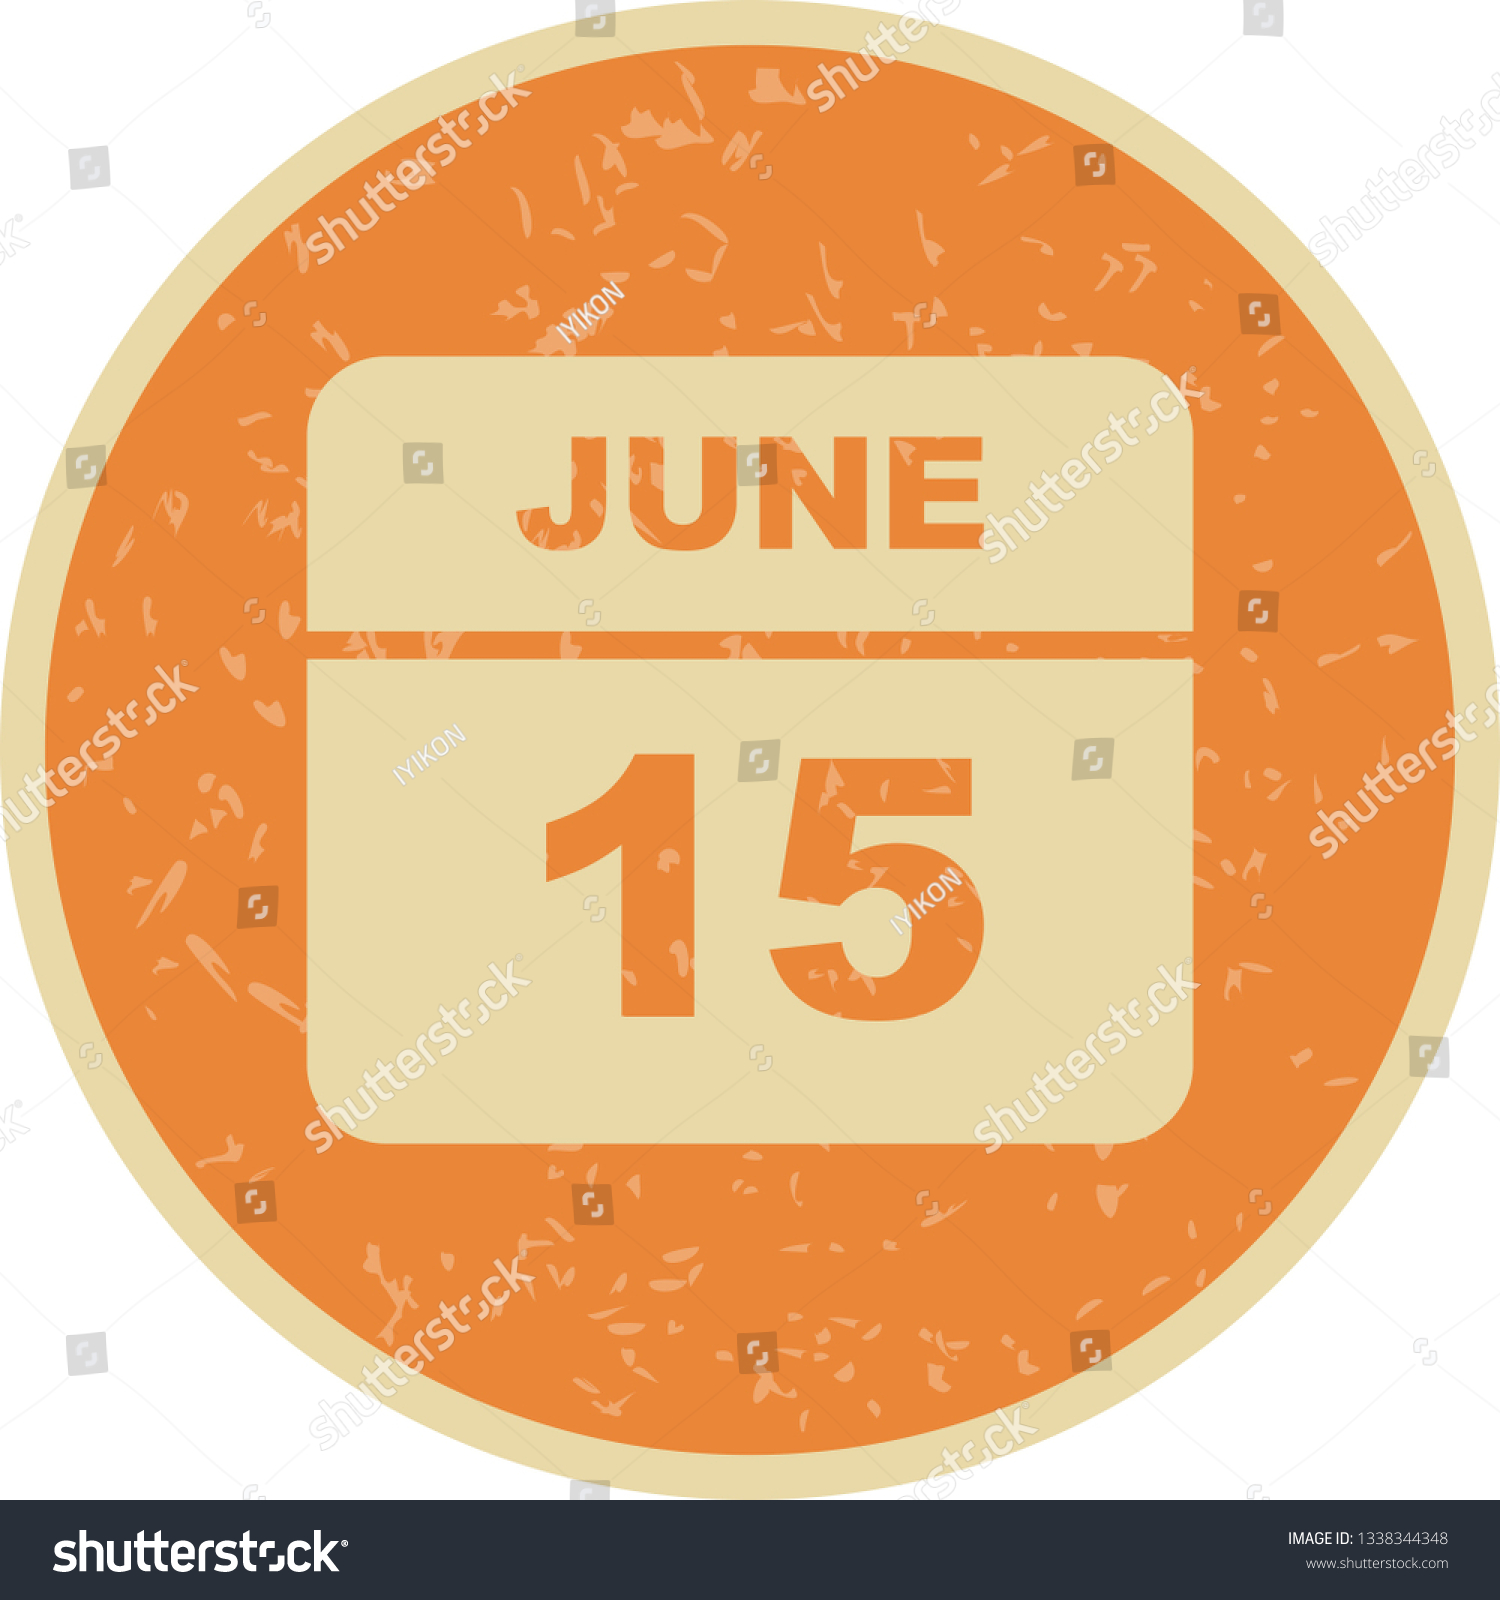 June 15th Date on a Single Day Calendar Royalty Free Stock Vector